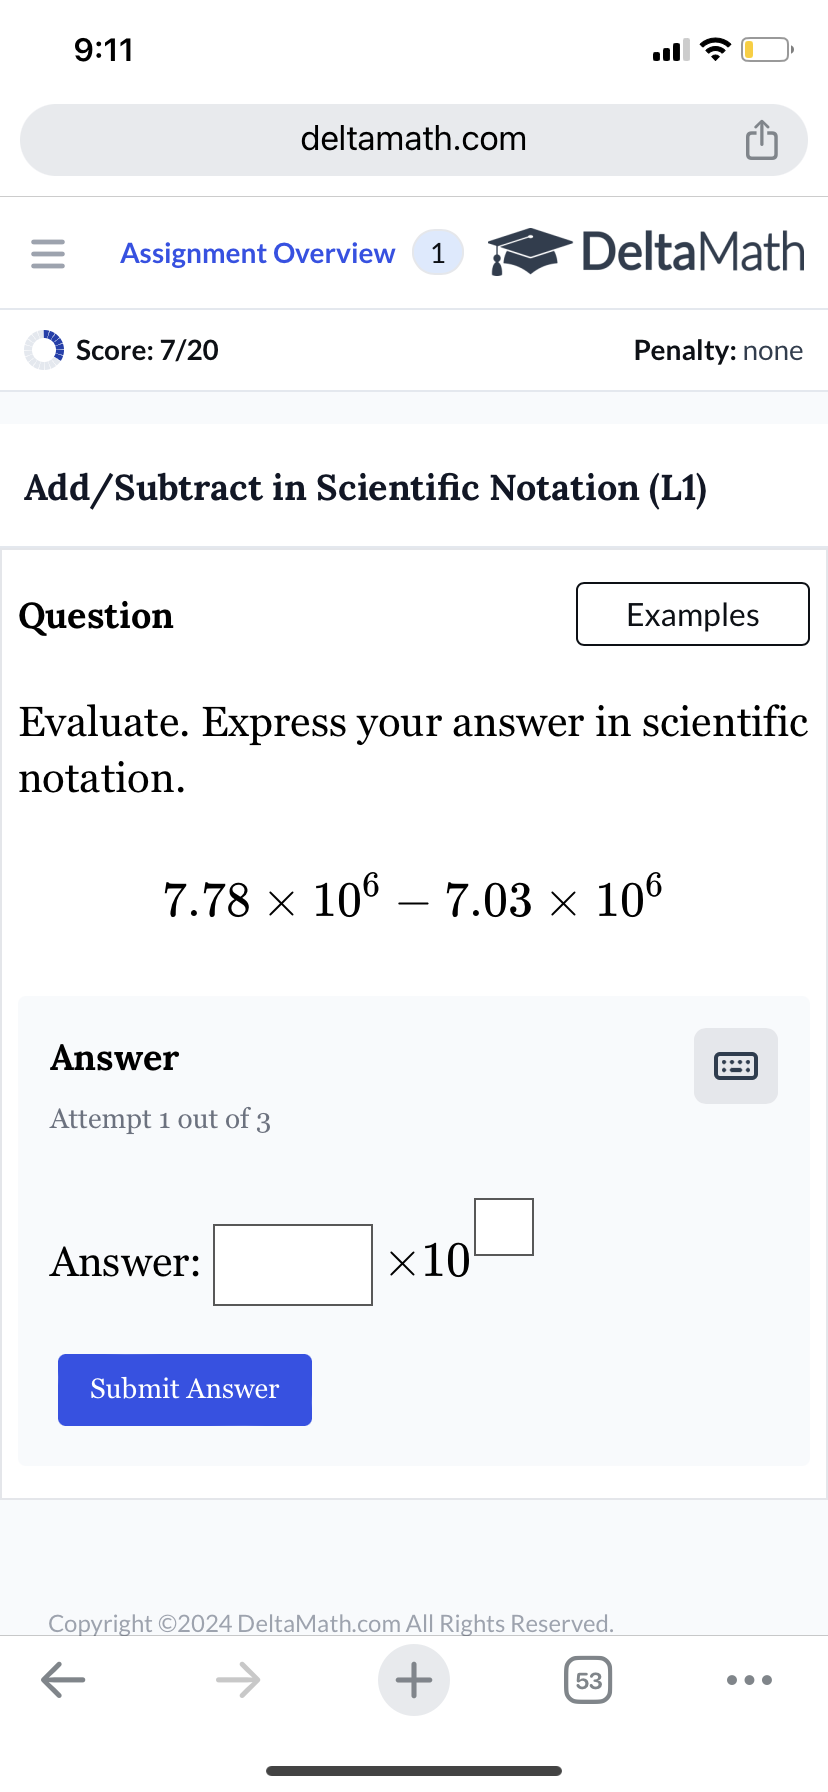 9:11
deltamath.com
= Assignment Overview 1
DeltaMath
Score: 7/20
Penalty: none
Add/Subtract in Scientific Notation (L1)
Question
Examples
Evaluate. Express your answer in scientific
notation.
7.78 × 106 – 7.03 × 106
-
Answer
Attempt 1 out of 3
Answer:
Submit Answer
×10
Copyright ©2024 DeltaMath.com All Rights Reserved.
←
+
53